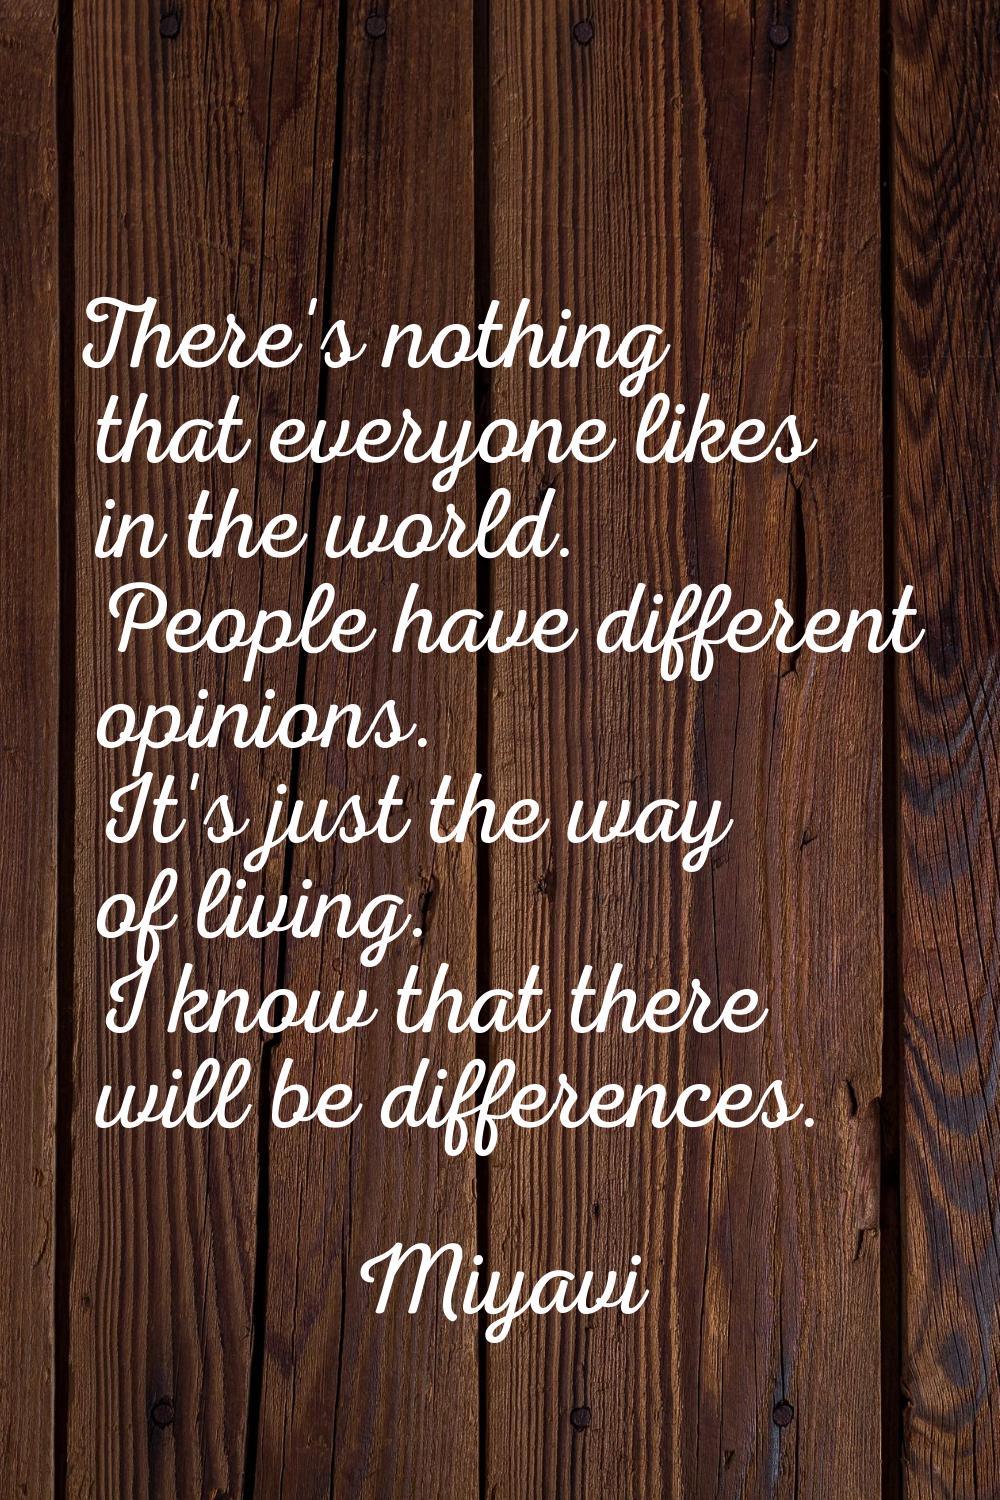 There's nothing that everyone likes in the world. People have different opinions. It's just the way